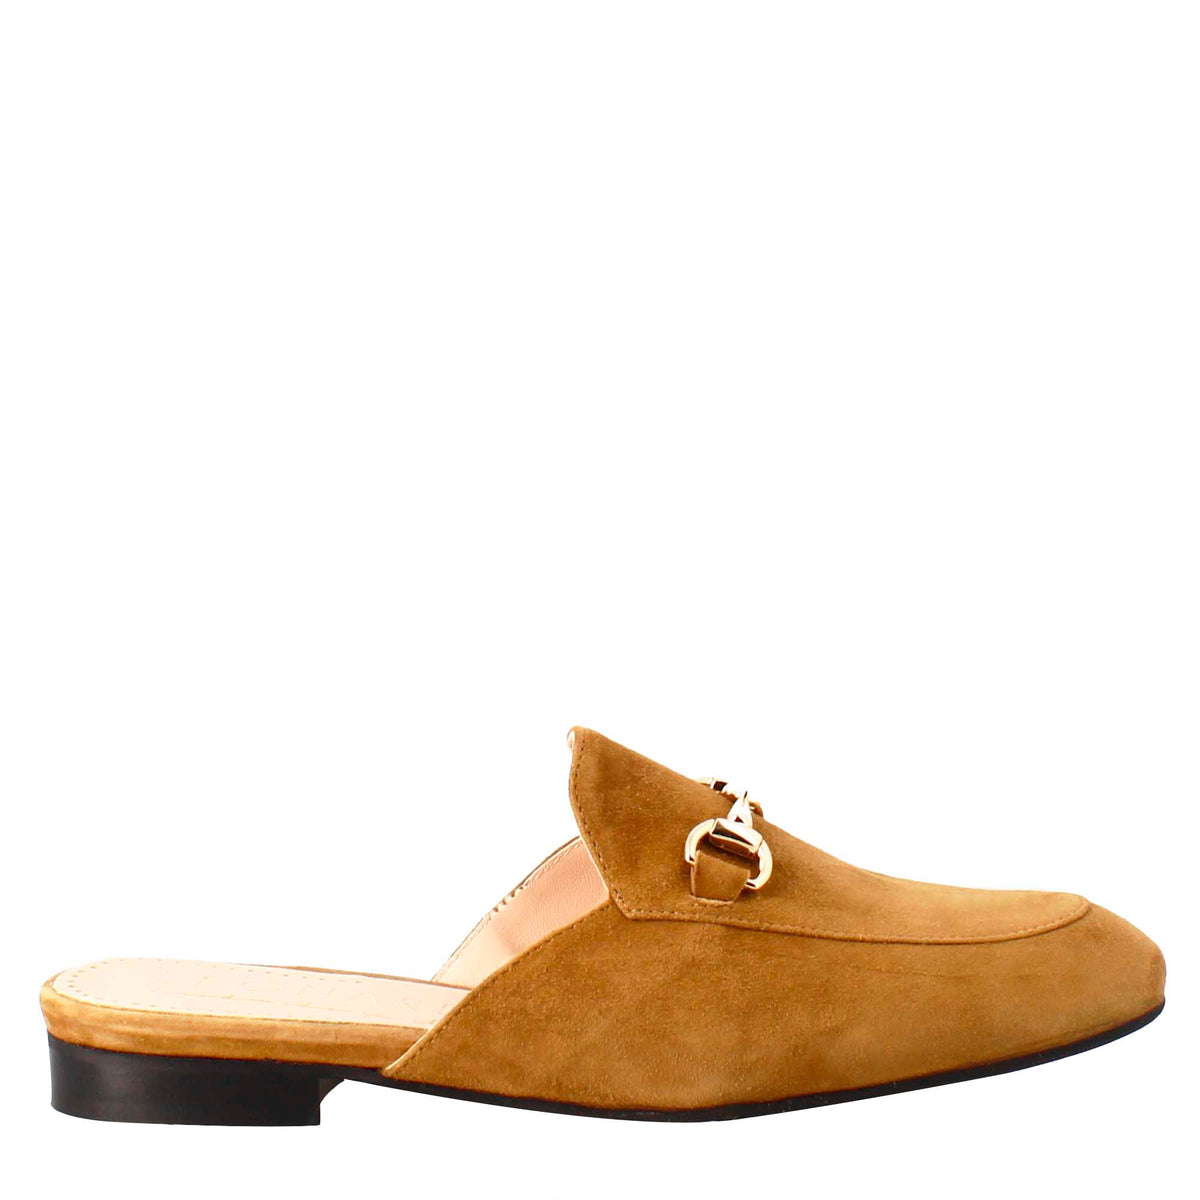 Women's mules in light brown suede with gold buckle